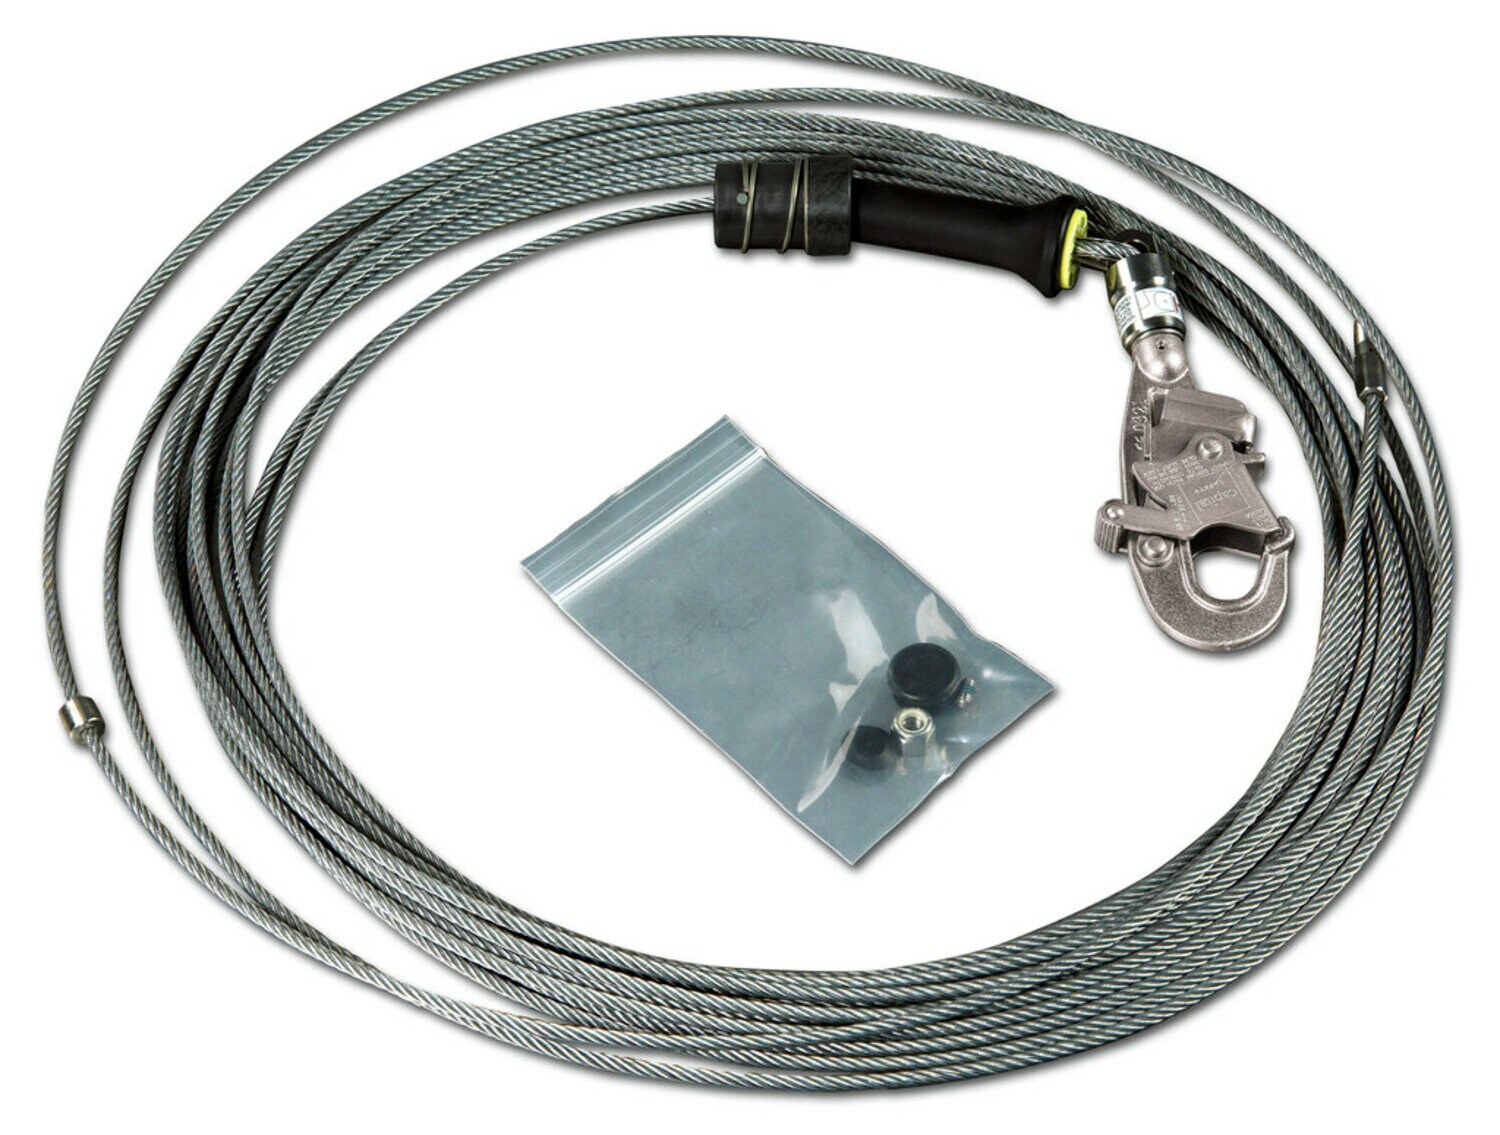 7100314295 - 3M DBI-SALA Sealed-Blok Self-Retracting Lifeline Cable Assembly
3900111, Stainless Steel, 85 ft